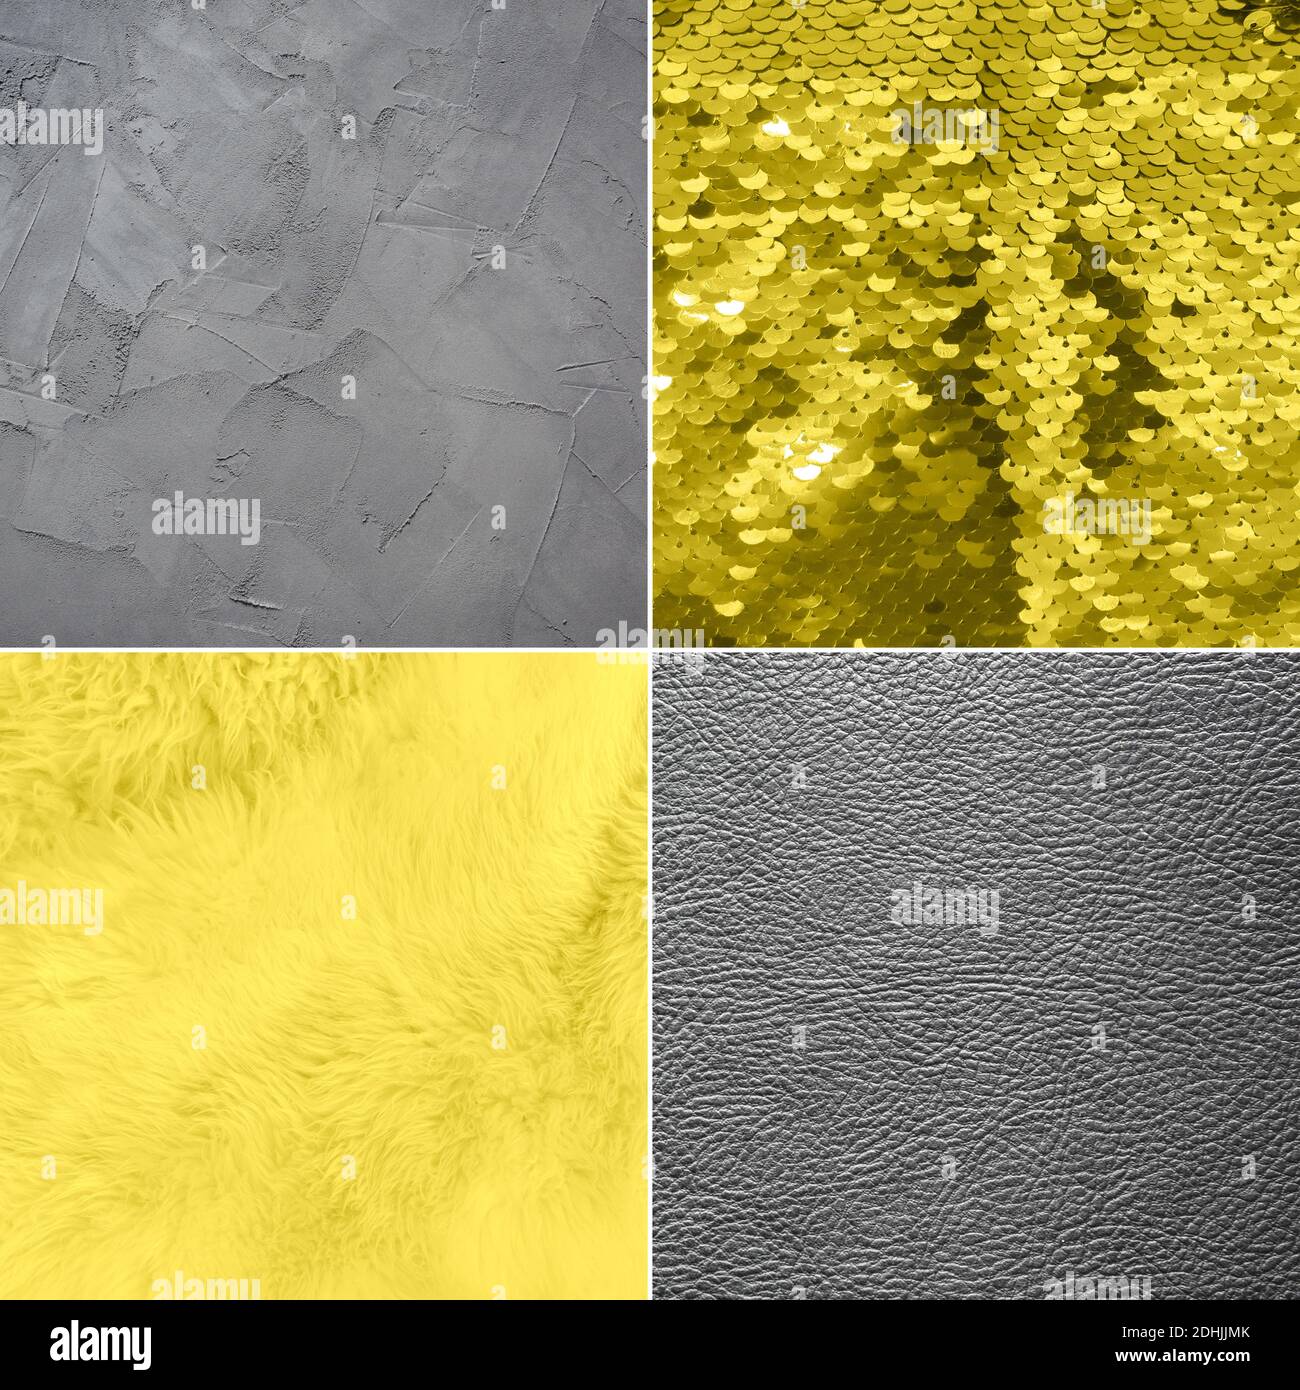 Square collage of different texture fur, leather and sparkles yellow and grey color. Trendy Ultimate Grey and Illuminating of the 2021 year. Stock Photo